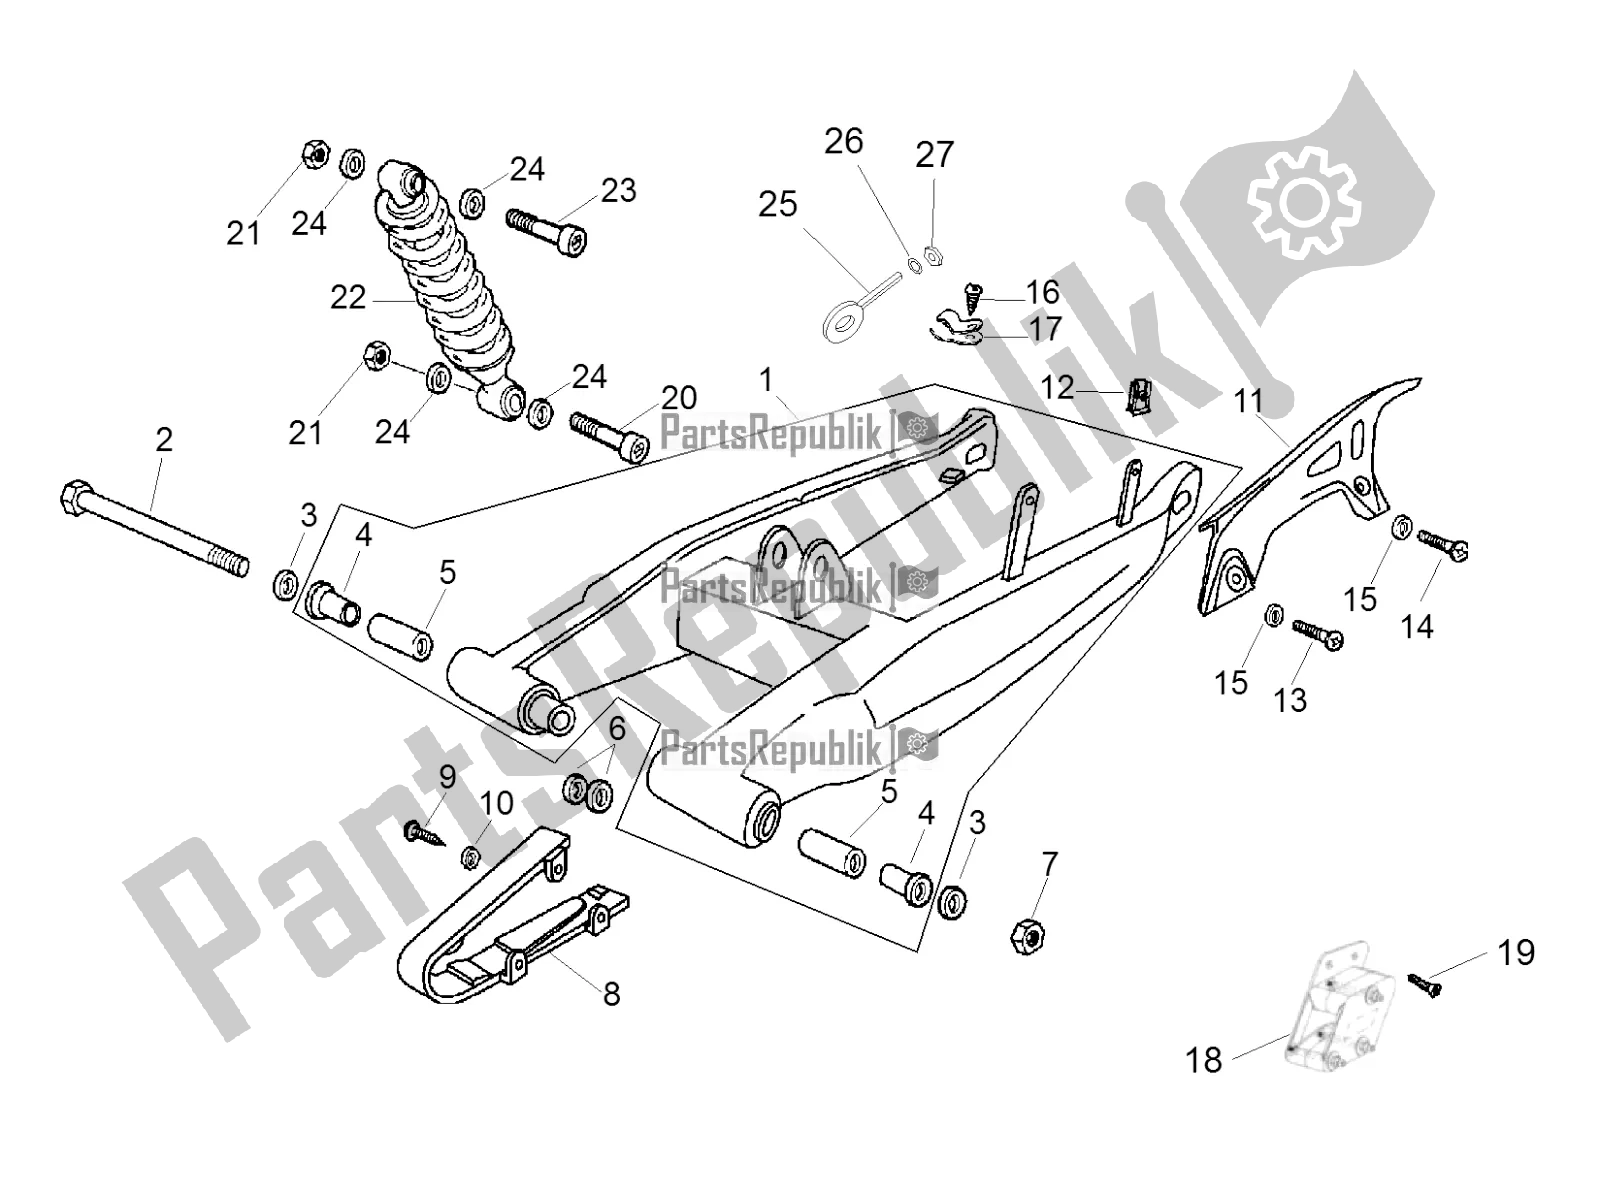 All parts for the Swing Arm of the Aprilia SX 50 Limited Edition 2017